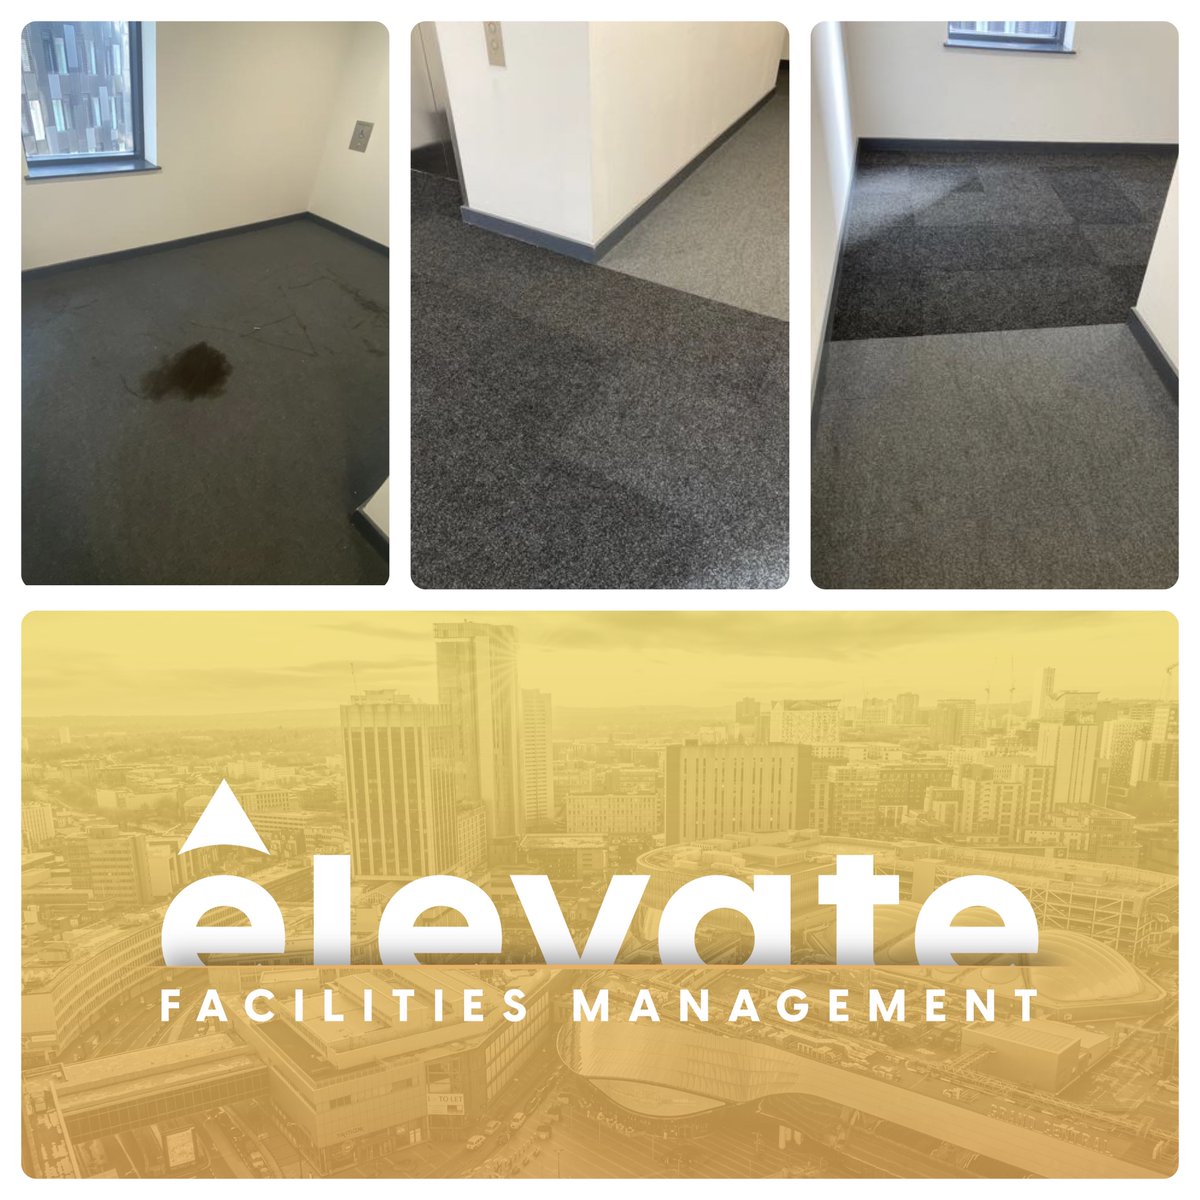 🌟 Elevate FM Ltd: Elevating Spaces One Tile at a Time! 🏢

📞 0330 128 9898
📧 info@elevatefm.co.uk
💻 elevatefm.co.uk

#SpaceEnhancement #ElevateFMLtd #CarpetTileReplacement #InnovativeSolutions #QualityService #TransformativeSpaces #MakingSpacesBetter